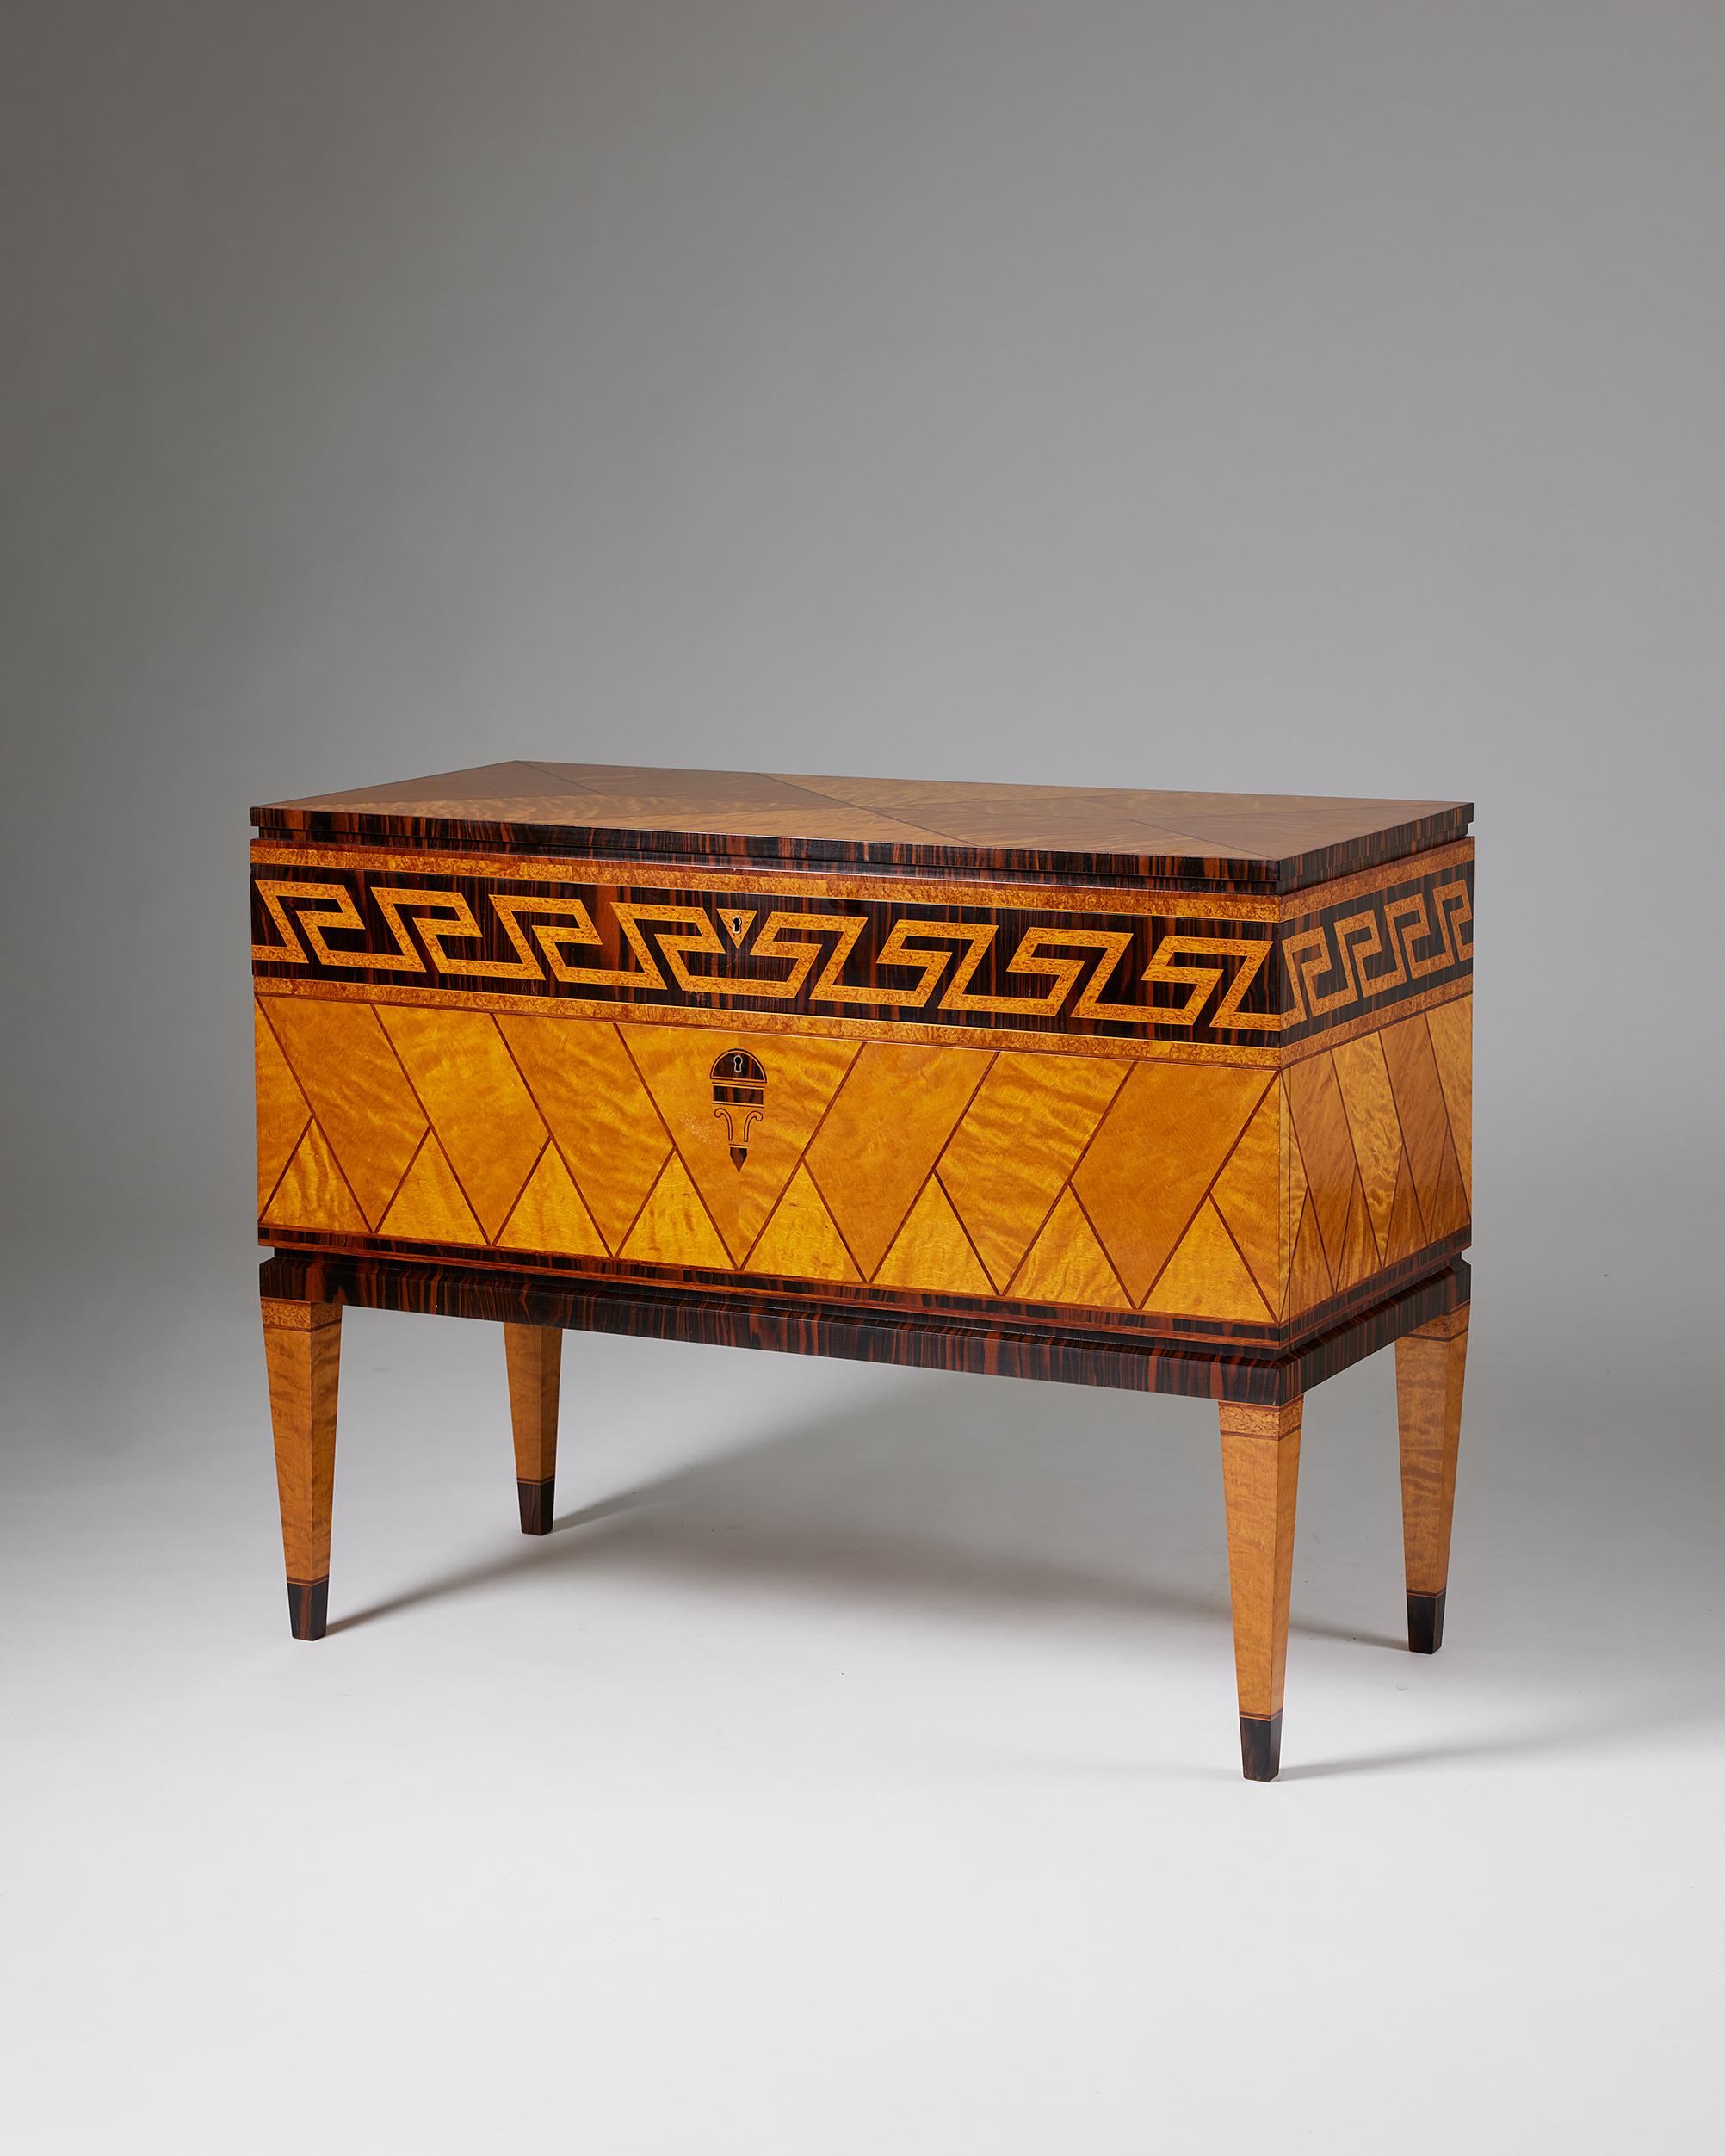 Swedish grace cabinet, anonymous,
Sweden, 1930s.

Veneered birch and Zebrano wood inlays.

This cabinet exemplifies the Swedish Grace style that emerged during the 1920s and 30s. The main body of the cabinets is decorated with geometric marquetry,